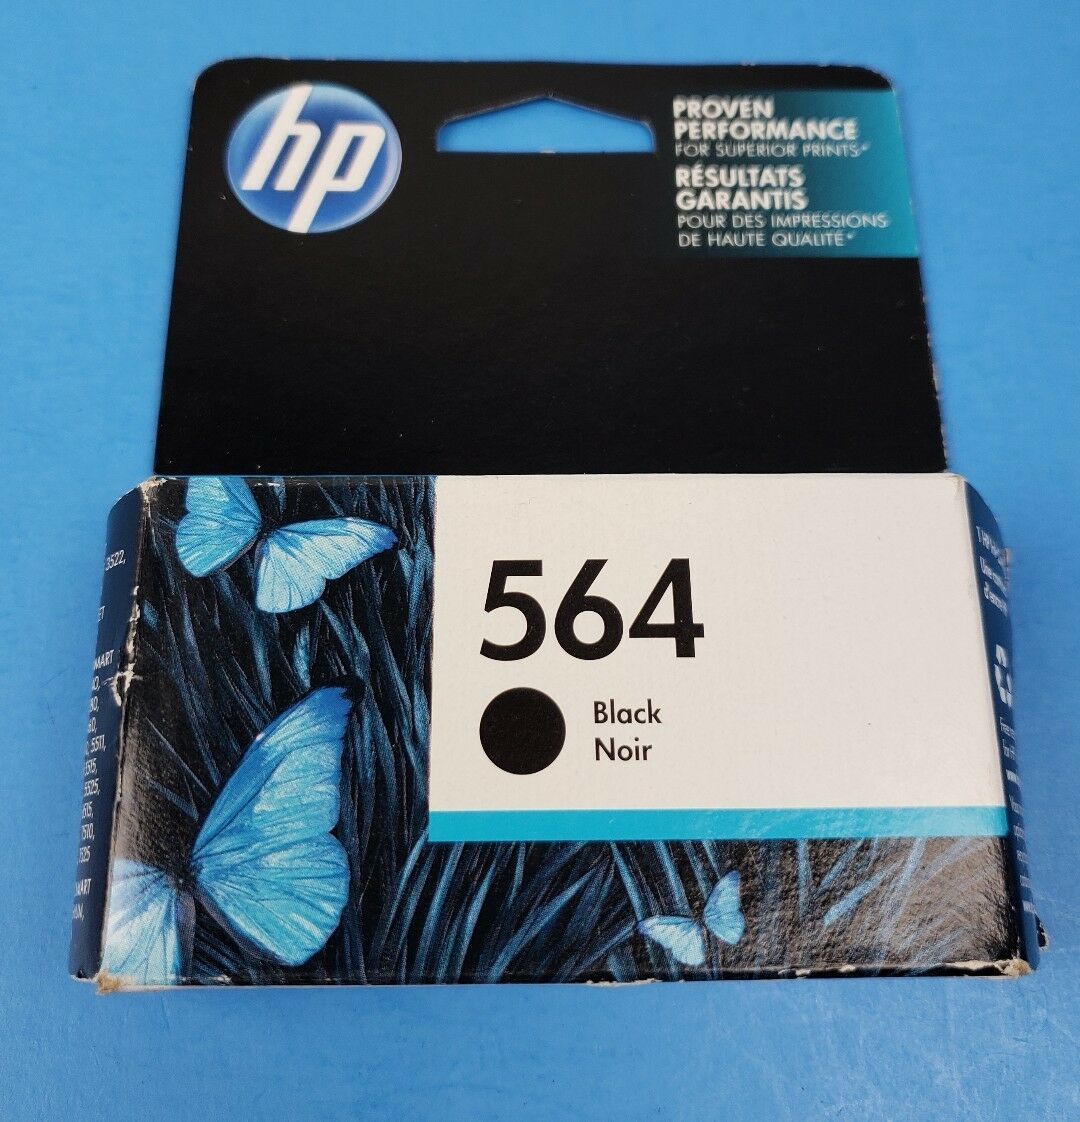 Primary image for HP 564 Black Ink Cartridge (CB316WN), EXP 2015